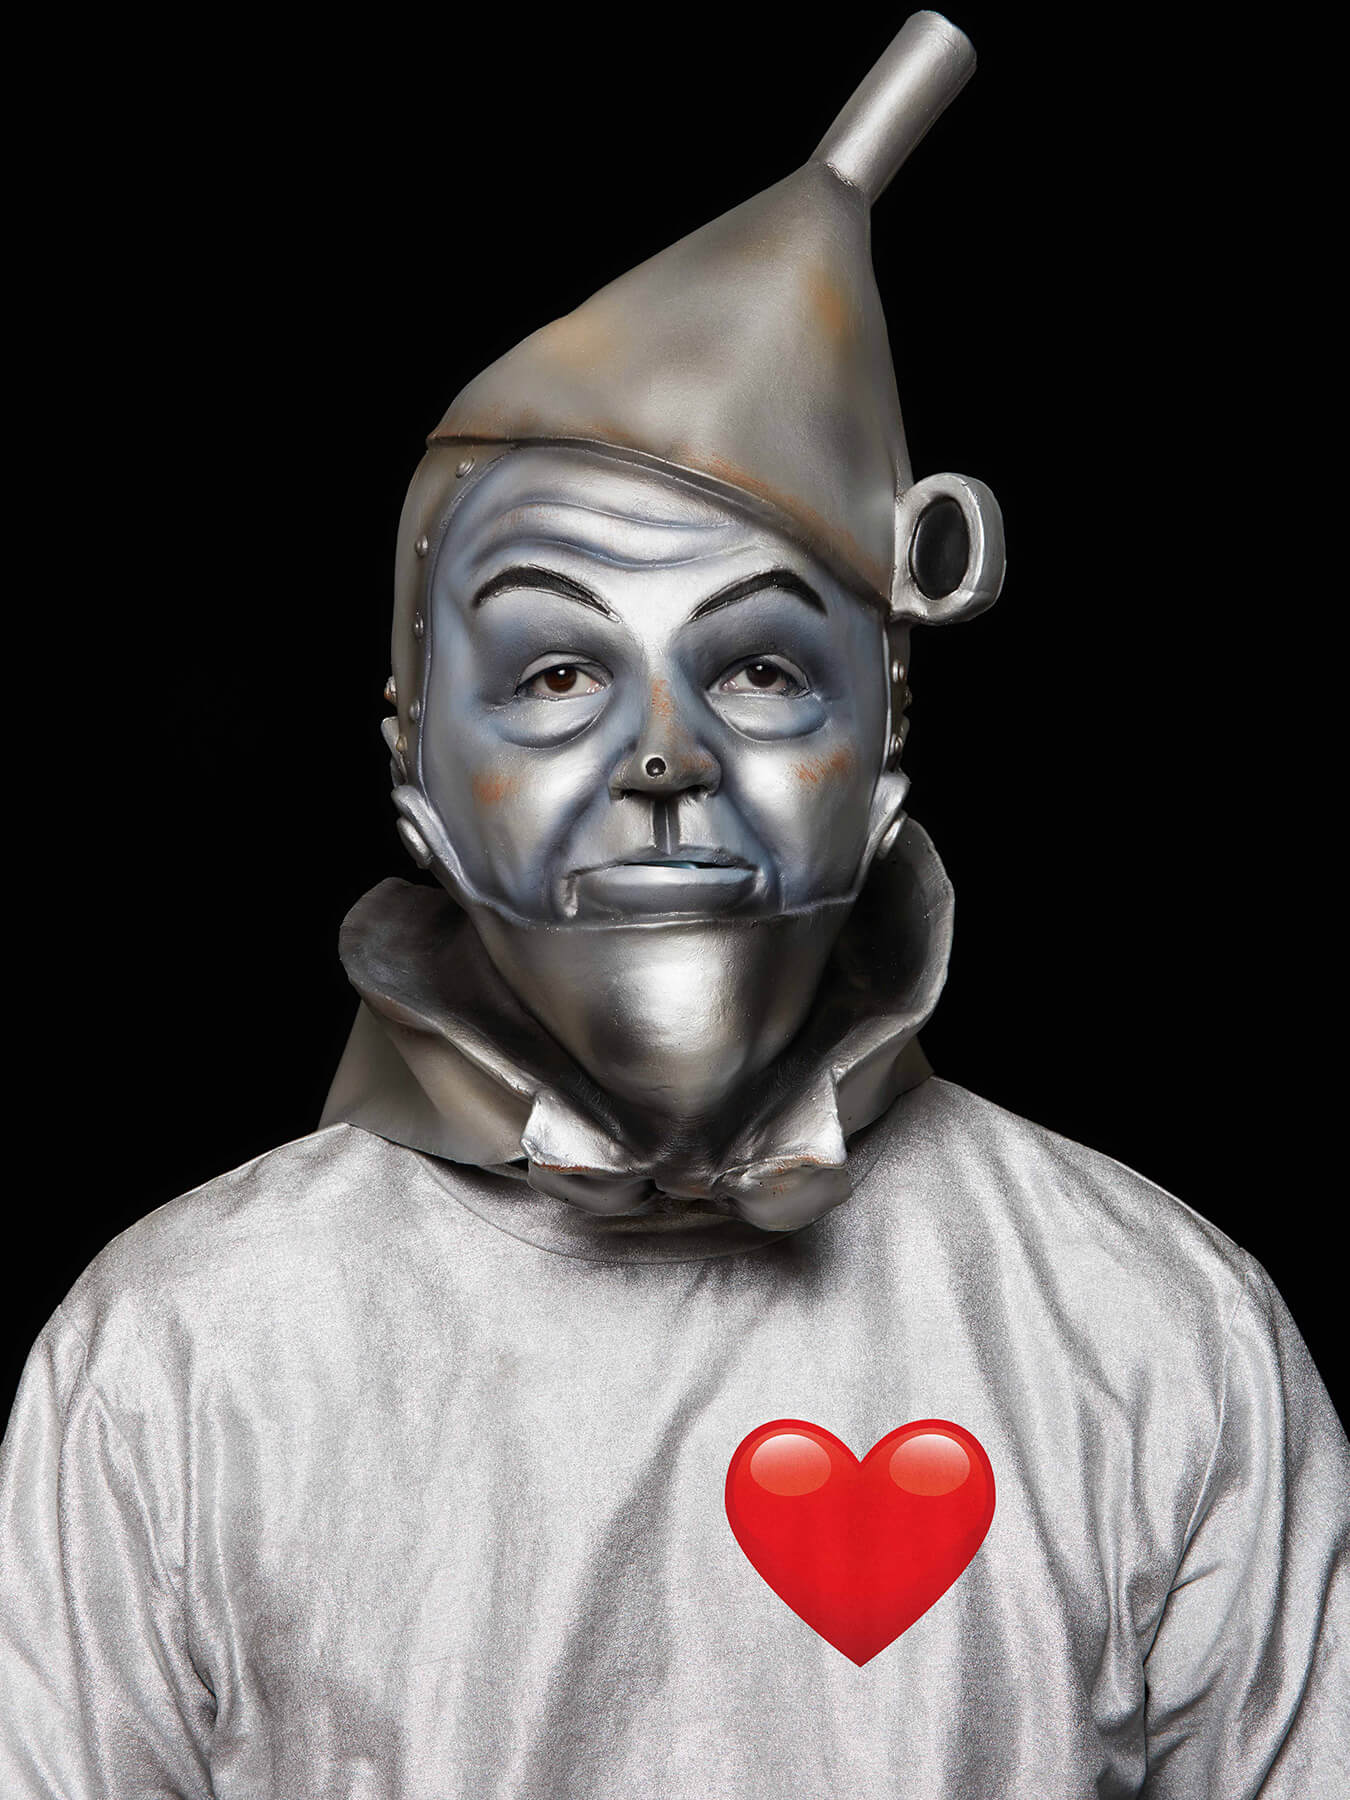 17 Jan 2018 Derong is photographed as Tinman from the wizard of oz